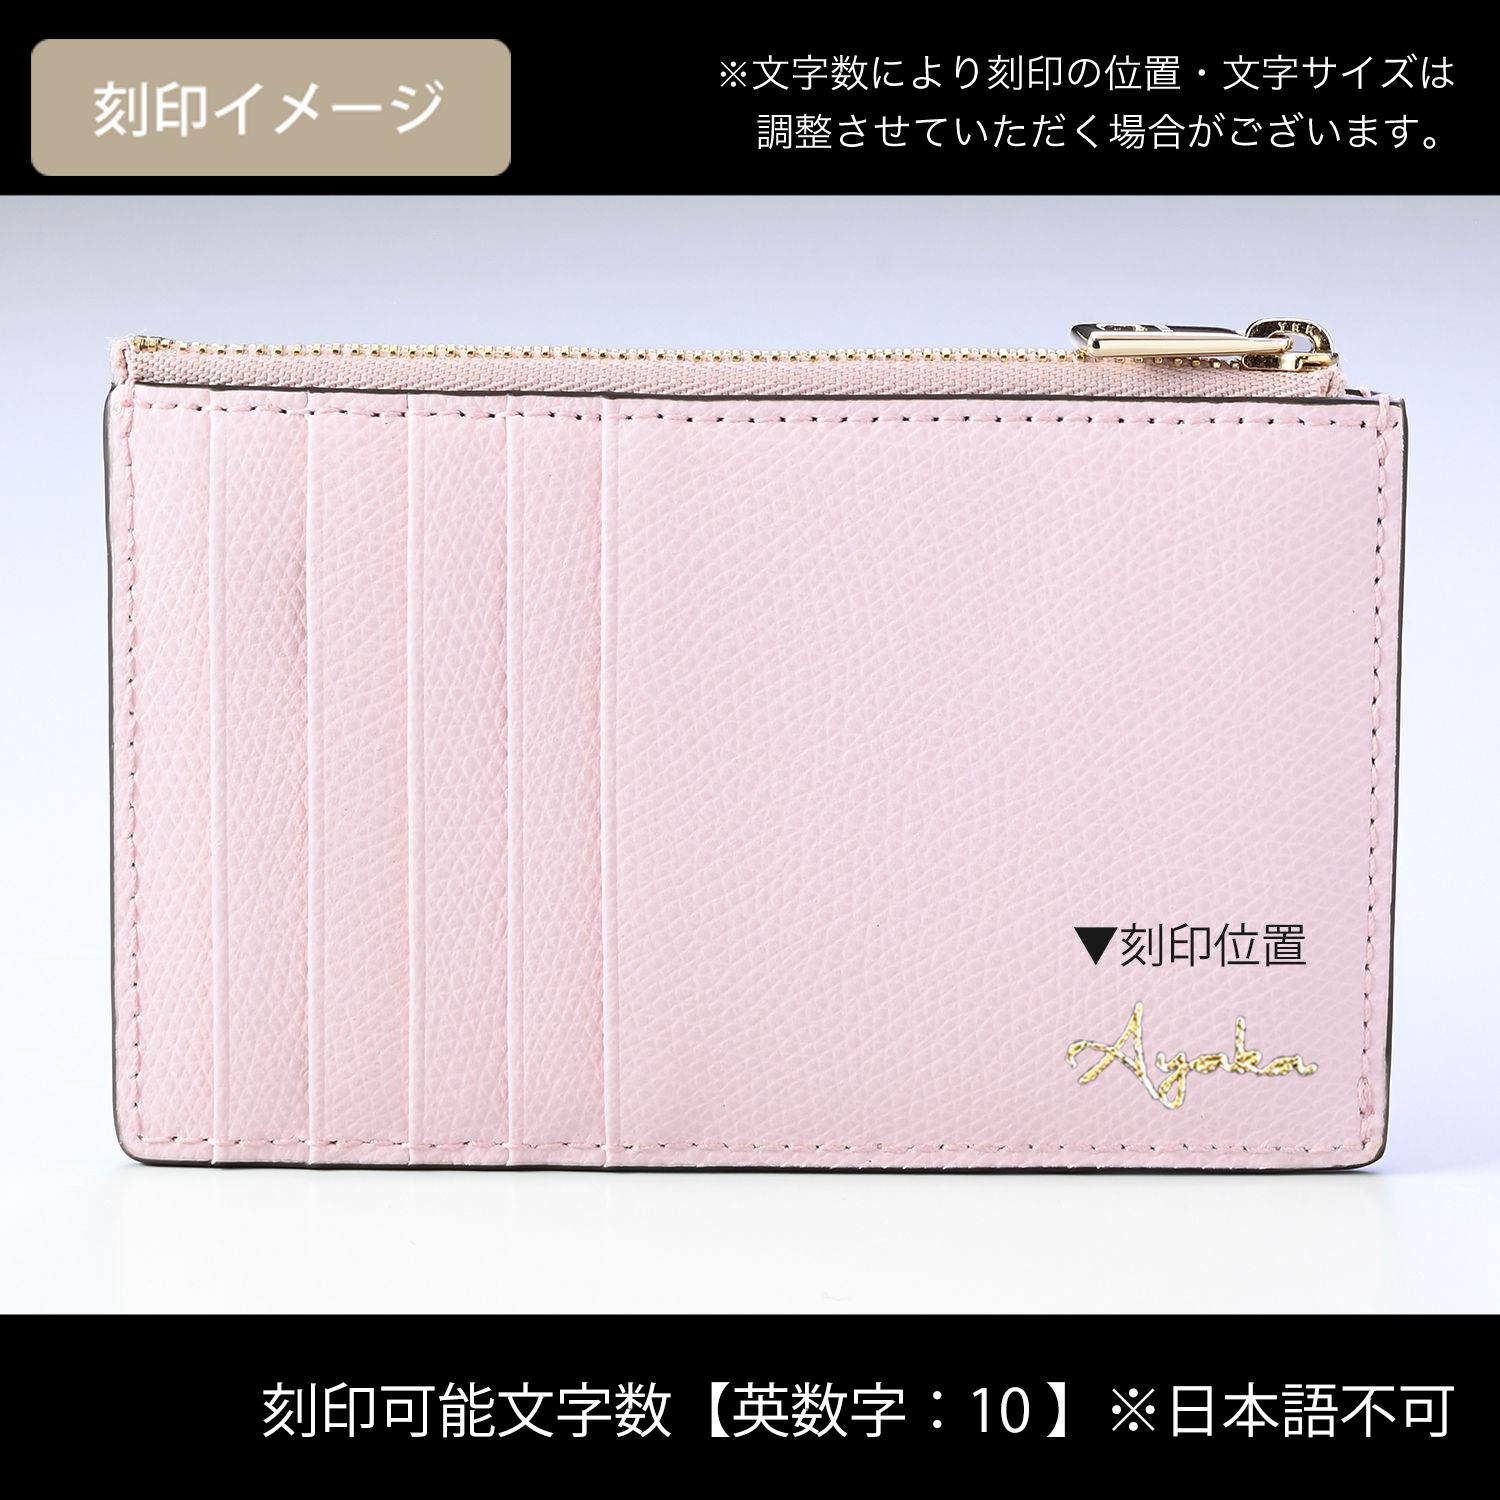  Furla card-case turtle rear CAMELIA Smart wallet f rug men to case quartz WP00310 ARE000 QJ000. pushed . name inserting possible ( fees optional )